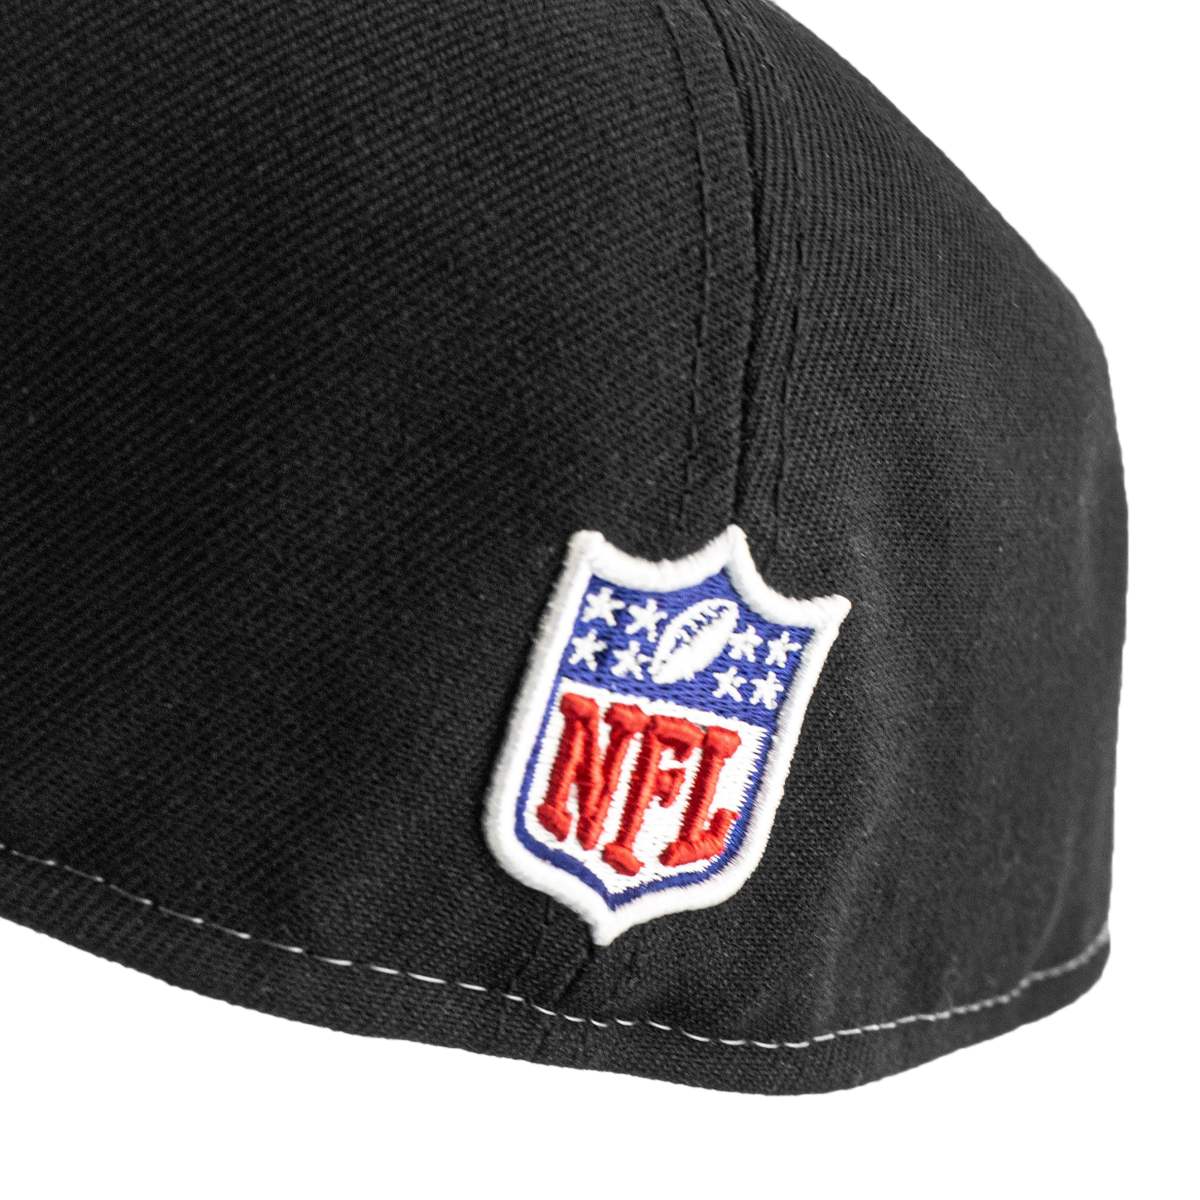 New Era Oakland Raiders NFL Sideline Historic 59Fifty Fitted Cap 60406882-